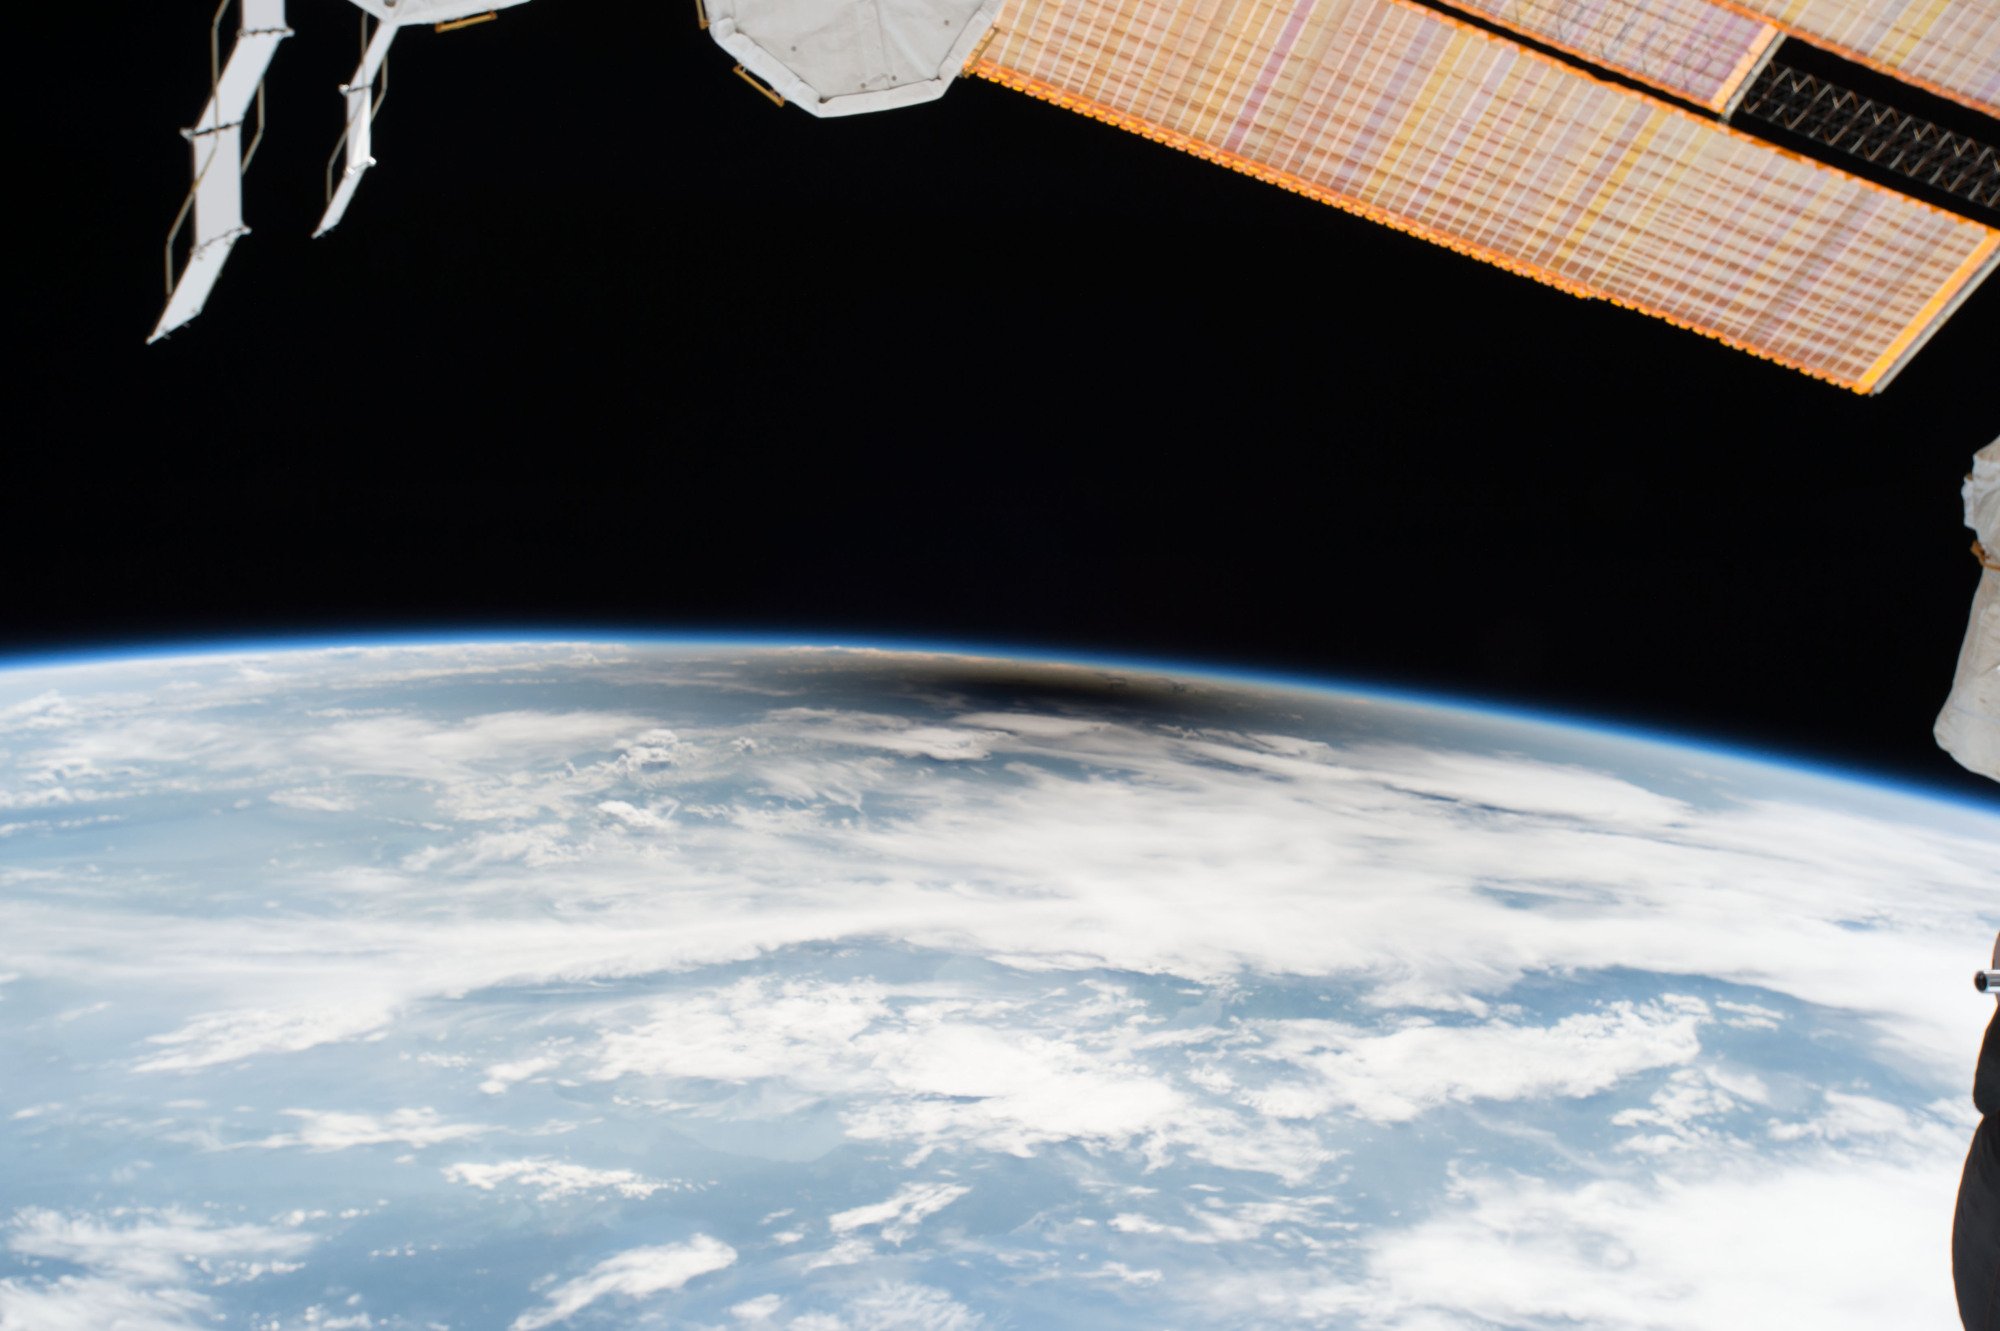 The 2017 total solar eclipse as viewed from the space station.